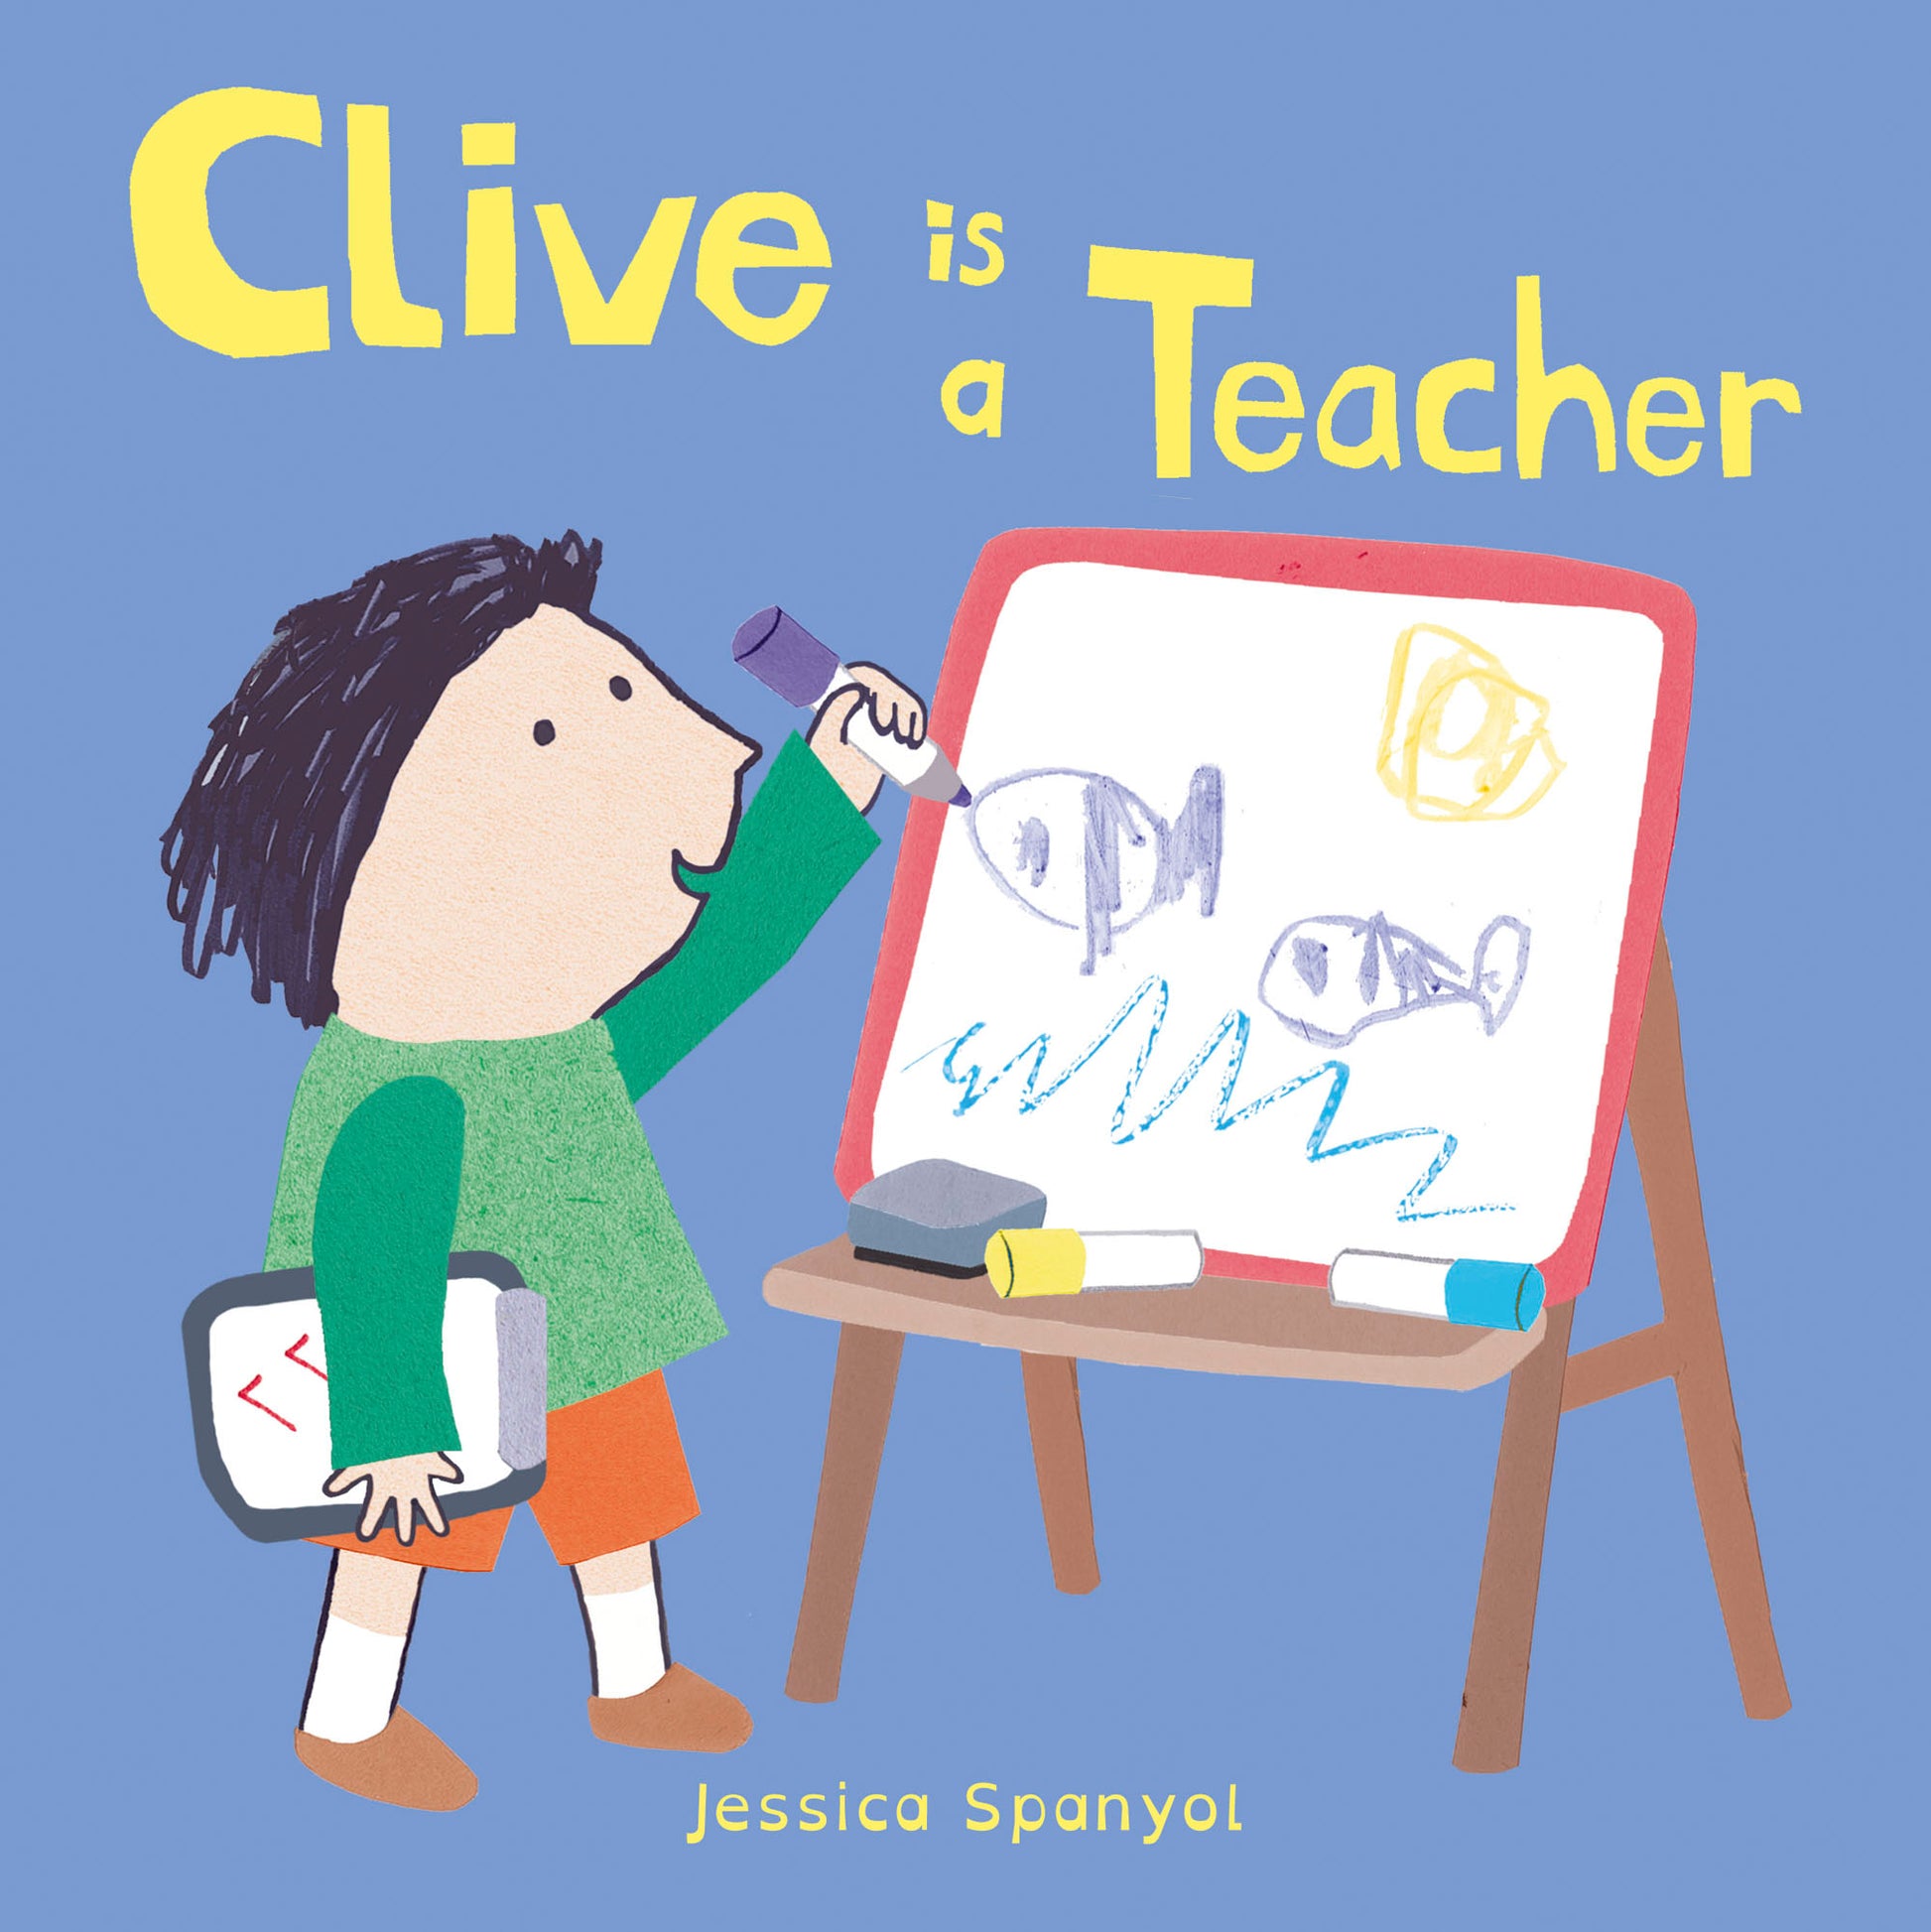 Clive is a Teacher